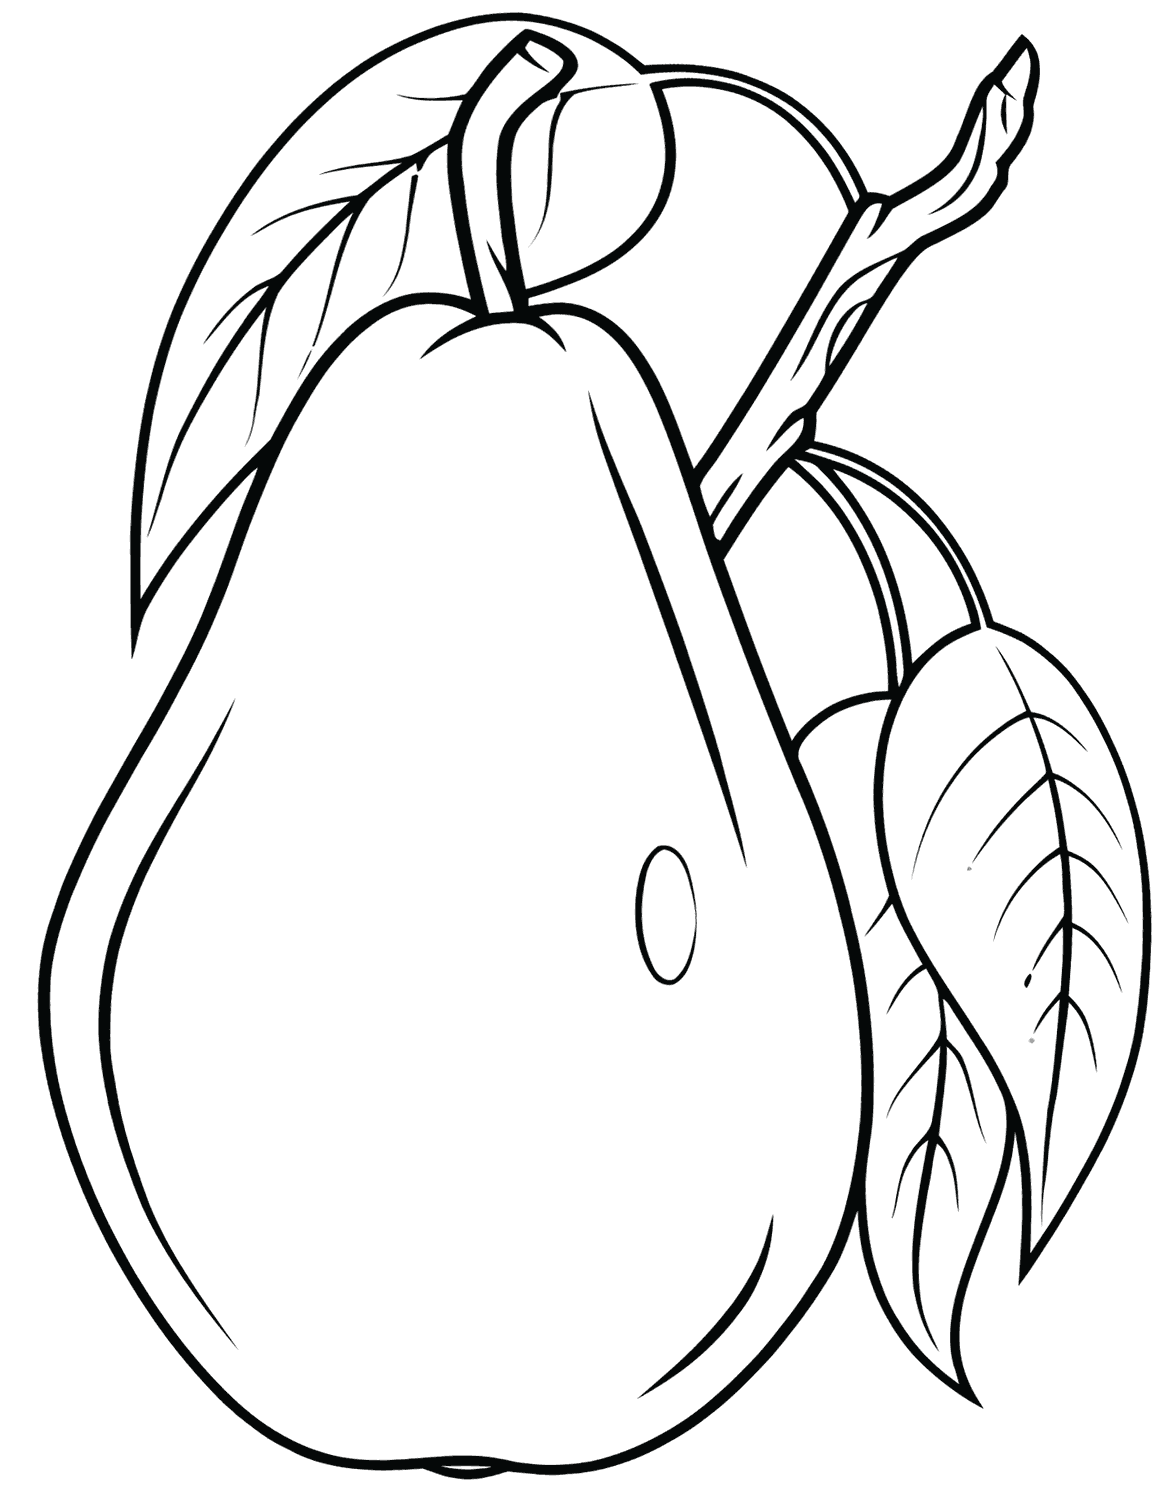 21 Free Printable Pear Coloring Pages In Vector Format Easy To Print ...